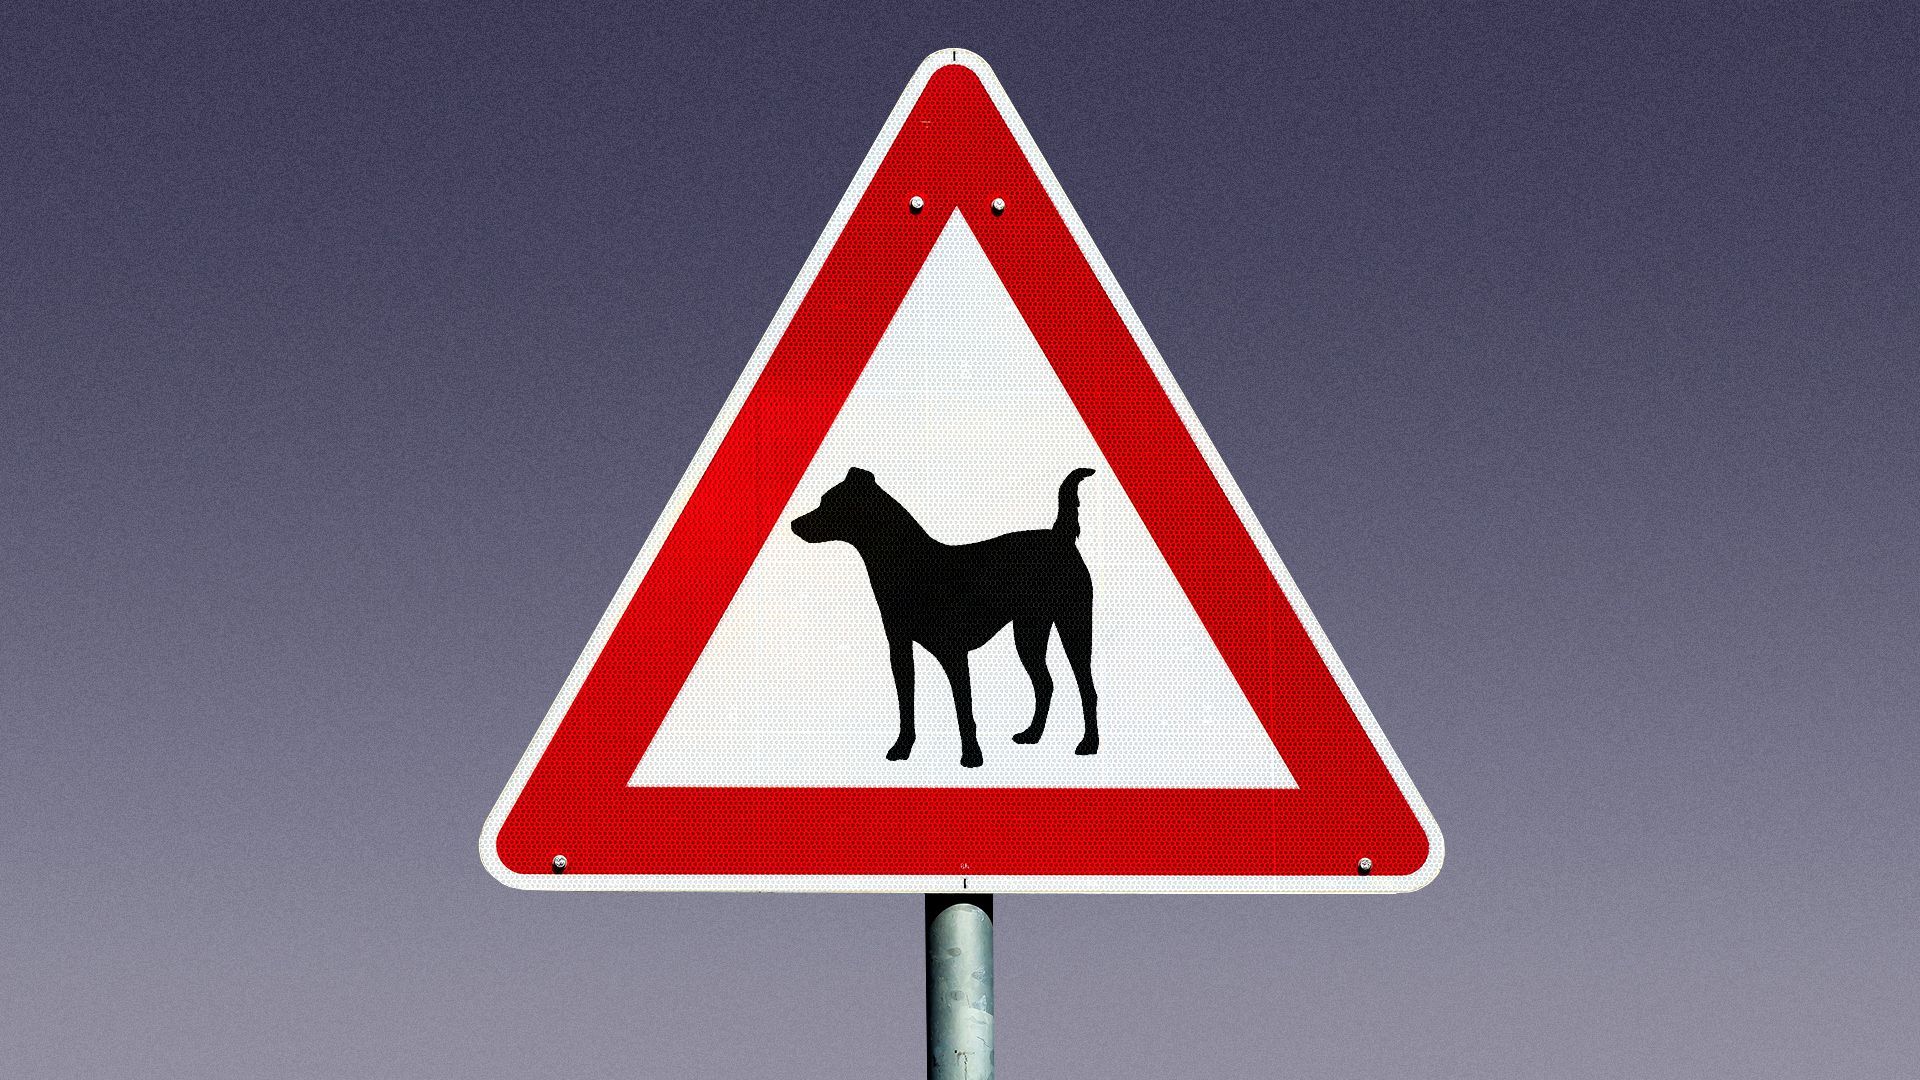 Illustration of a warning road sign showing a silhouette of a dog.